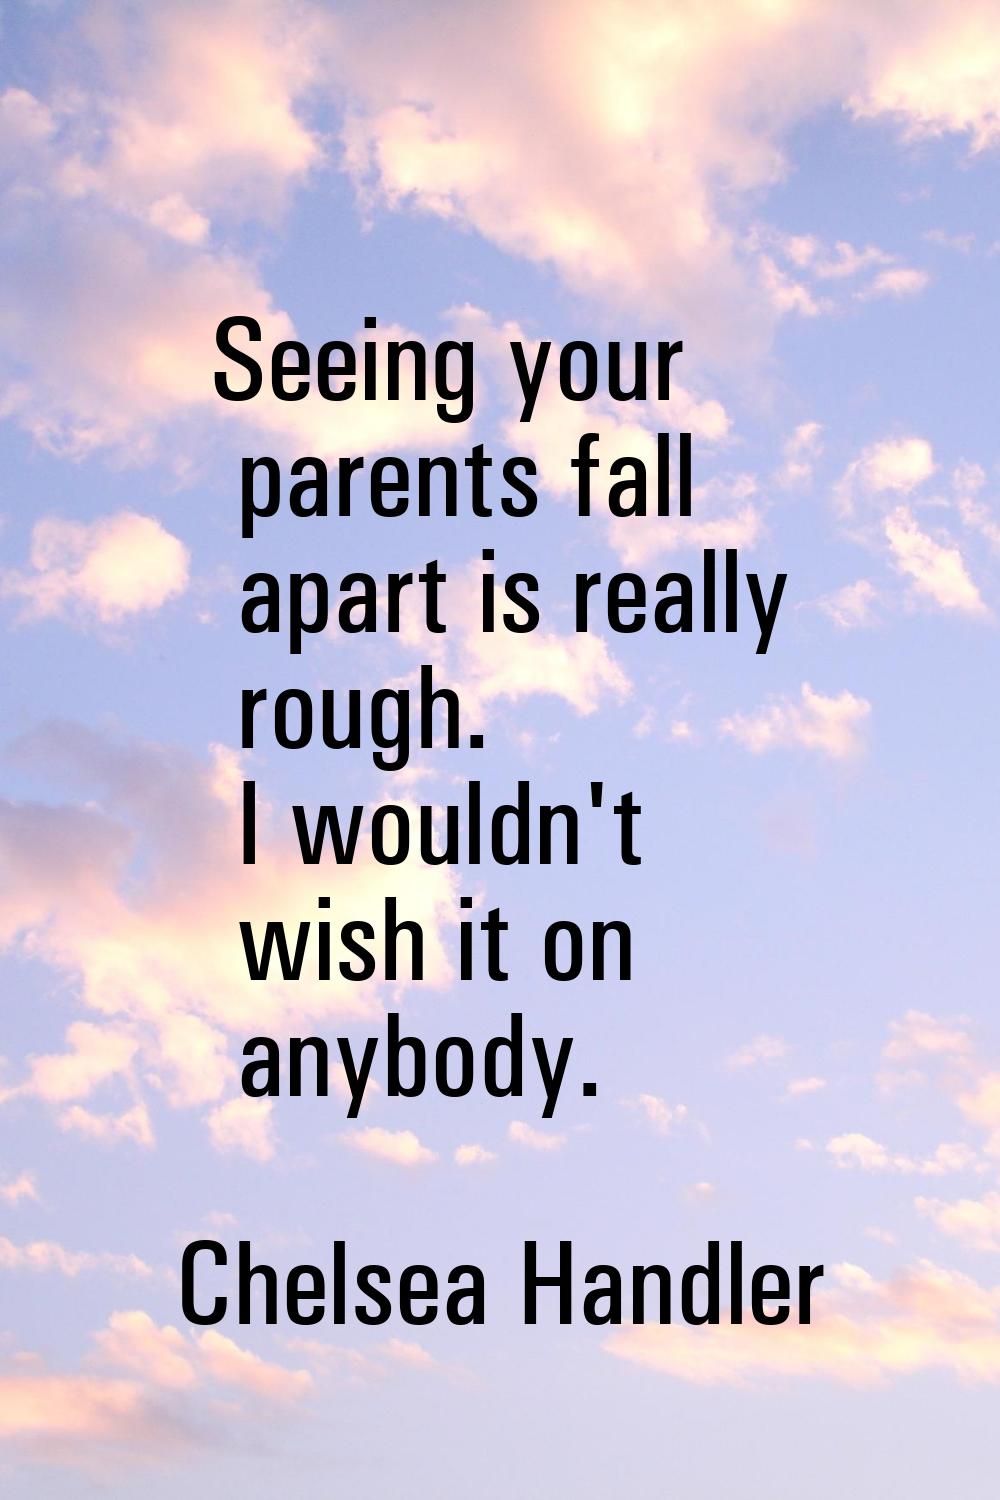 Seeing your parents fall apart is really rough. I wouldn't wish it on anybody.